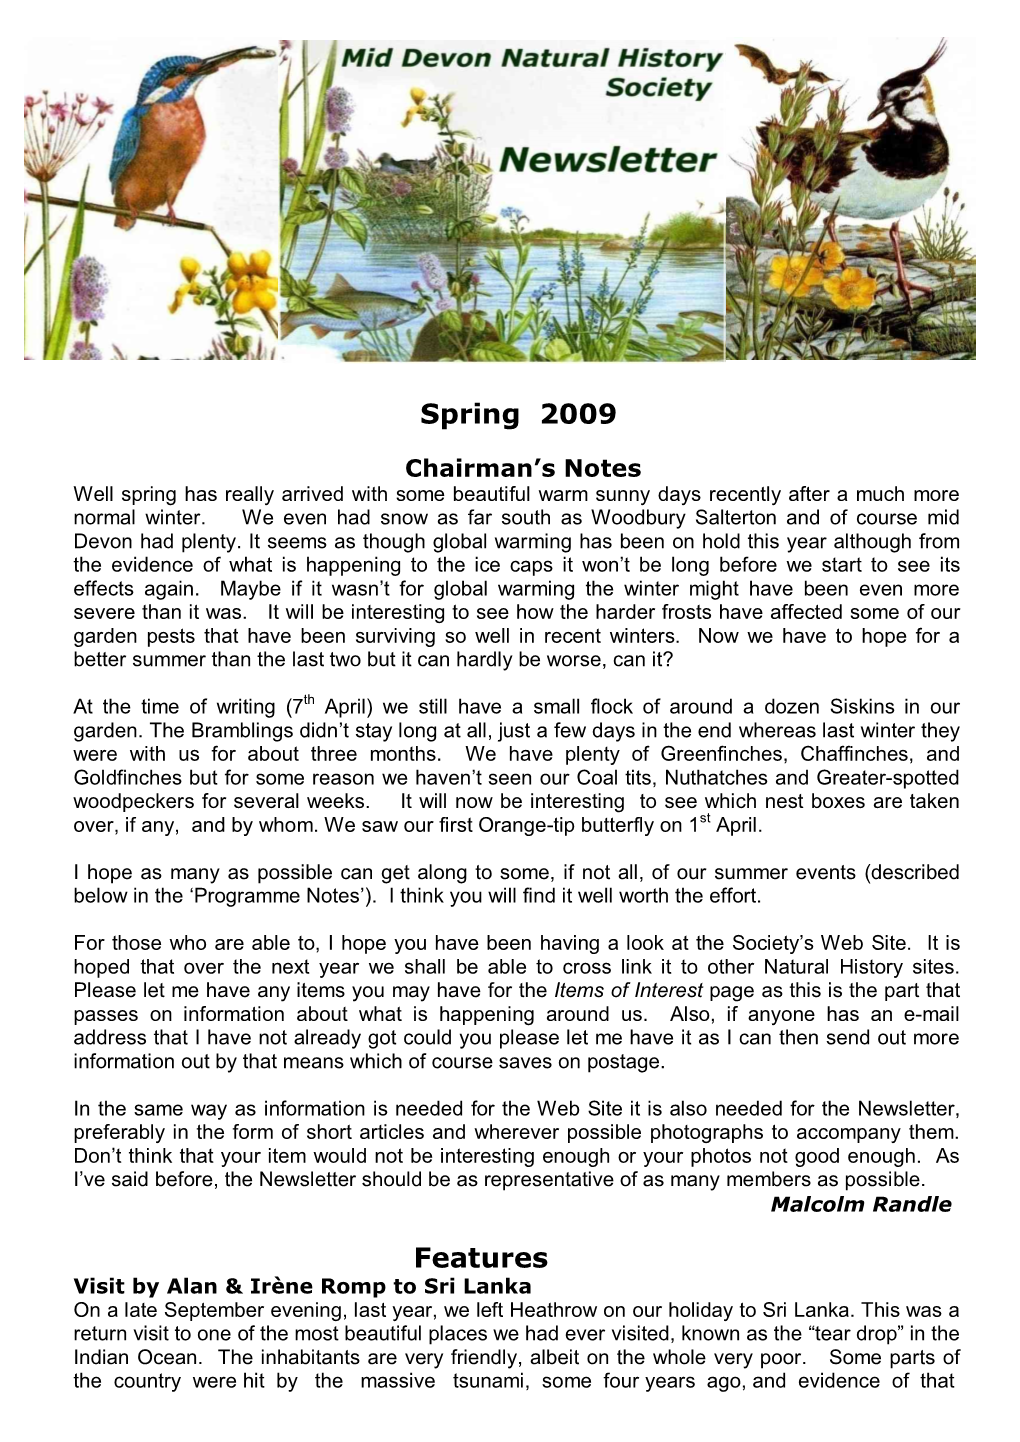 Spring 2009 Features